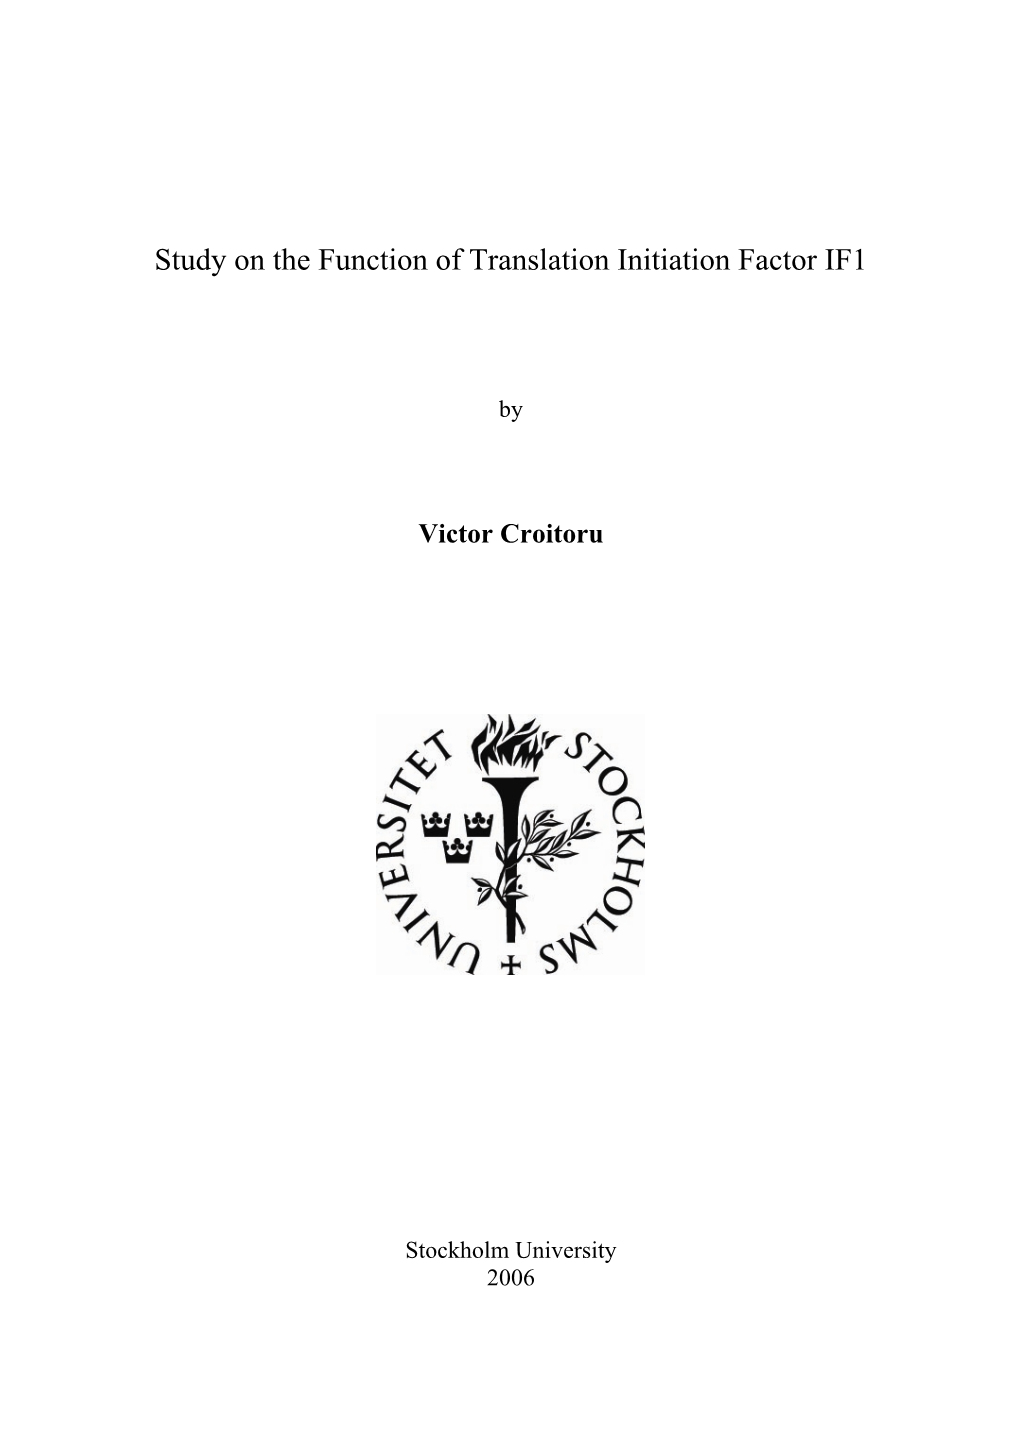 Study on the Function of Translation Initiation Factor IF1